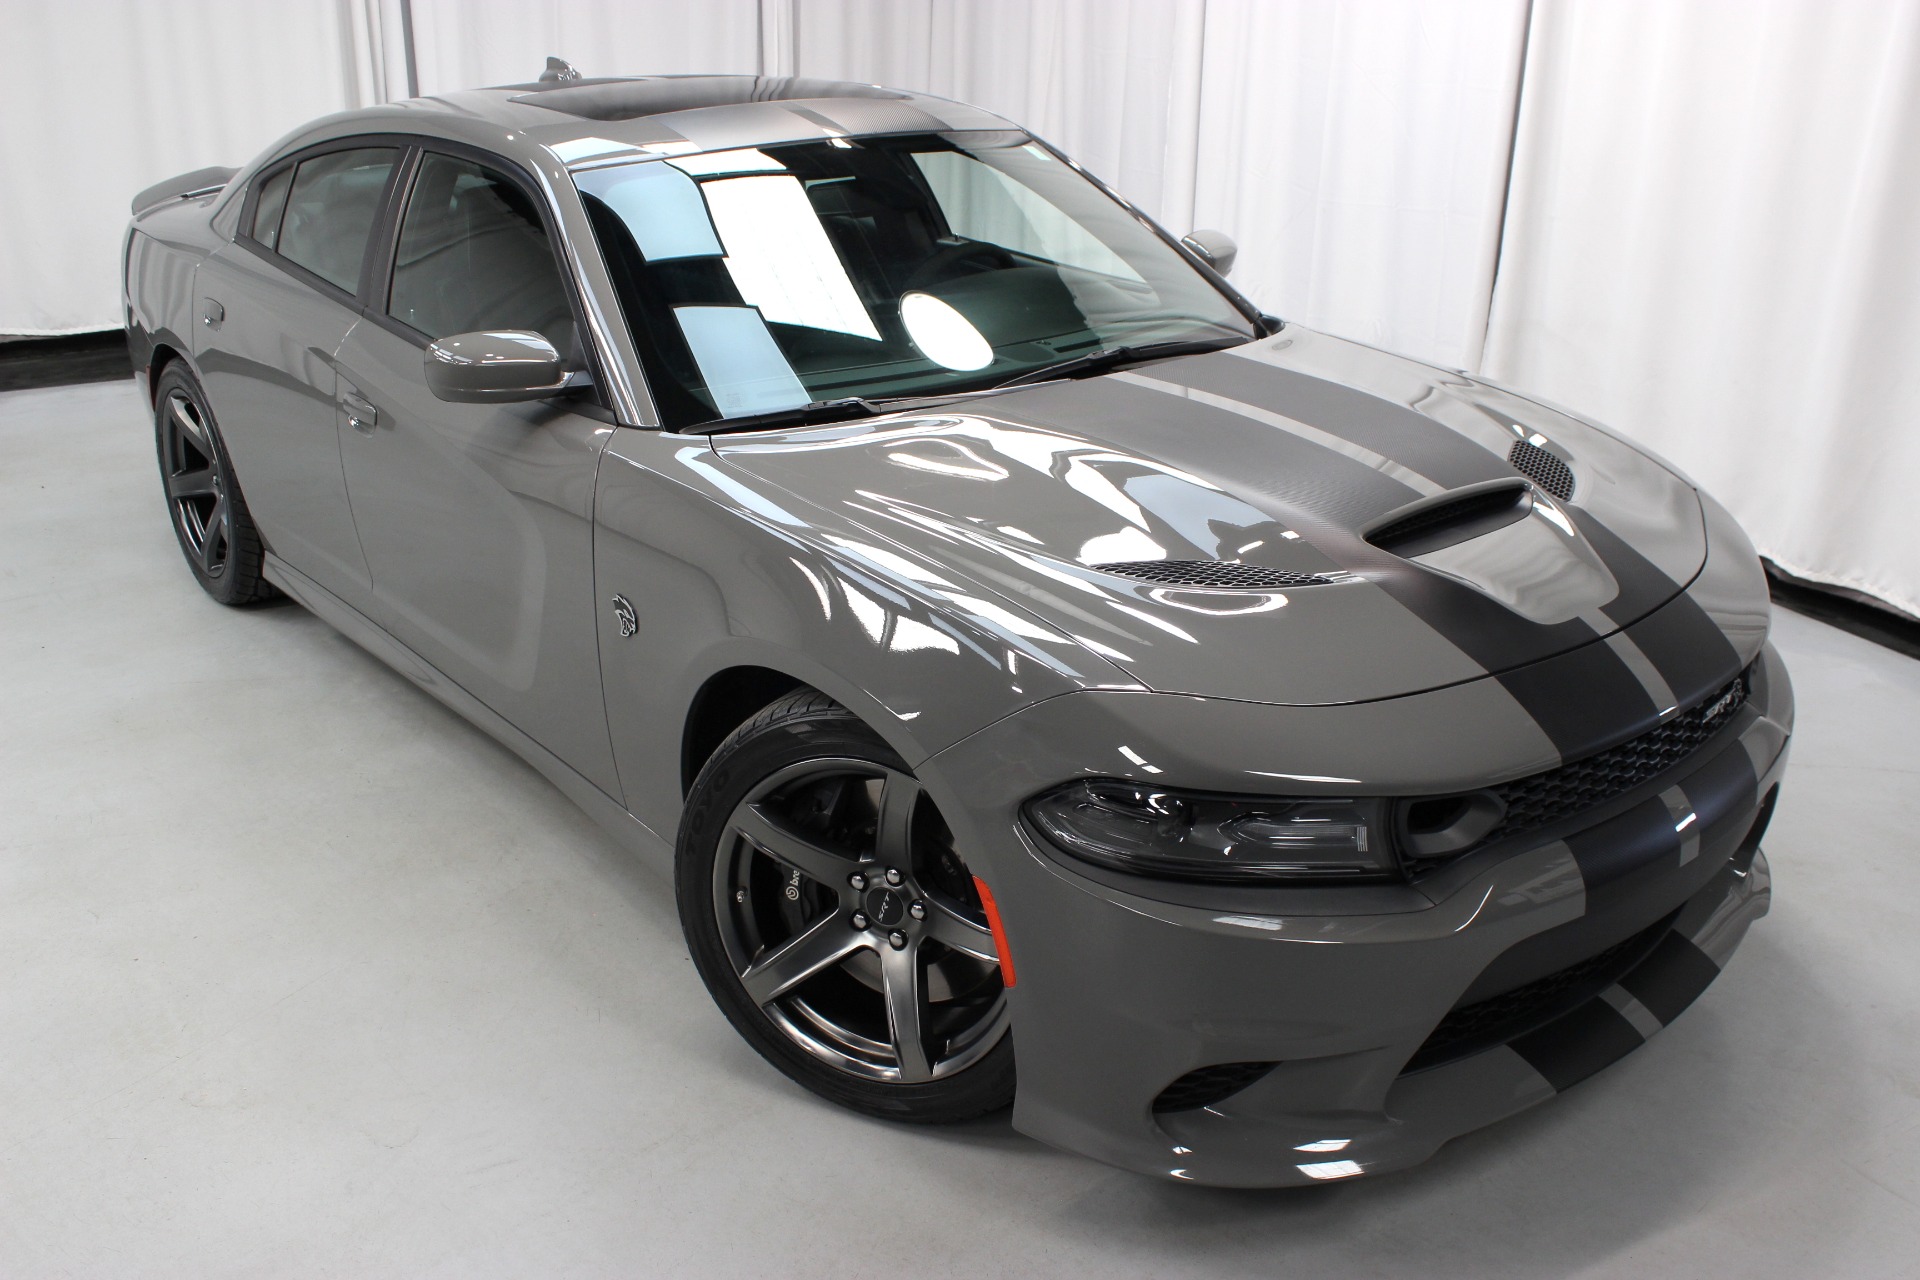 Used 2019 Dodge Charger SRT Hellcat For Sale (Sold) | Momentum Motorcars  Inc Stock #682096